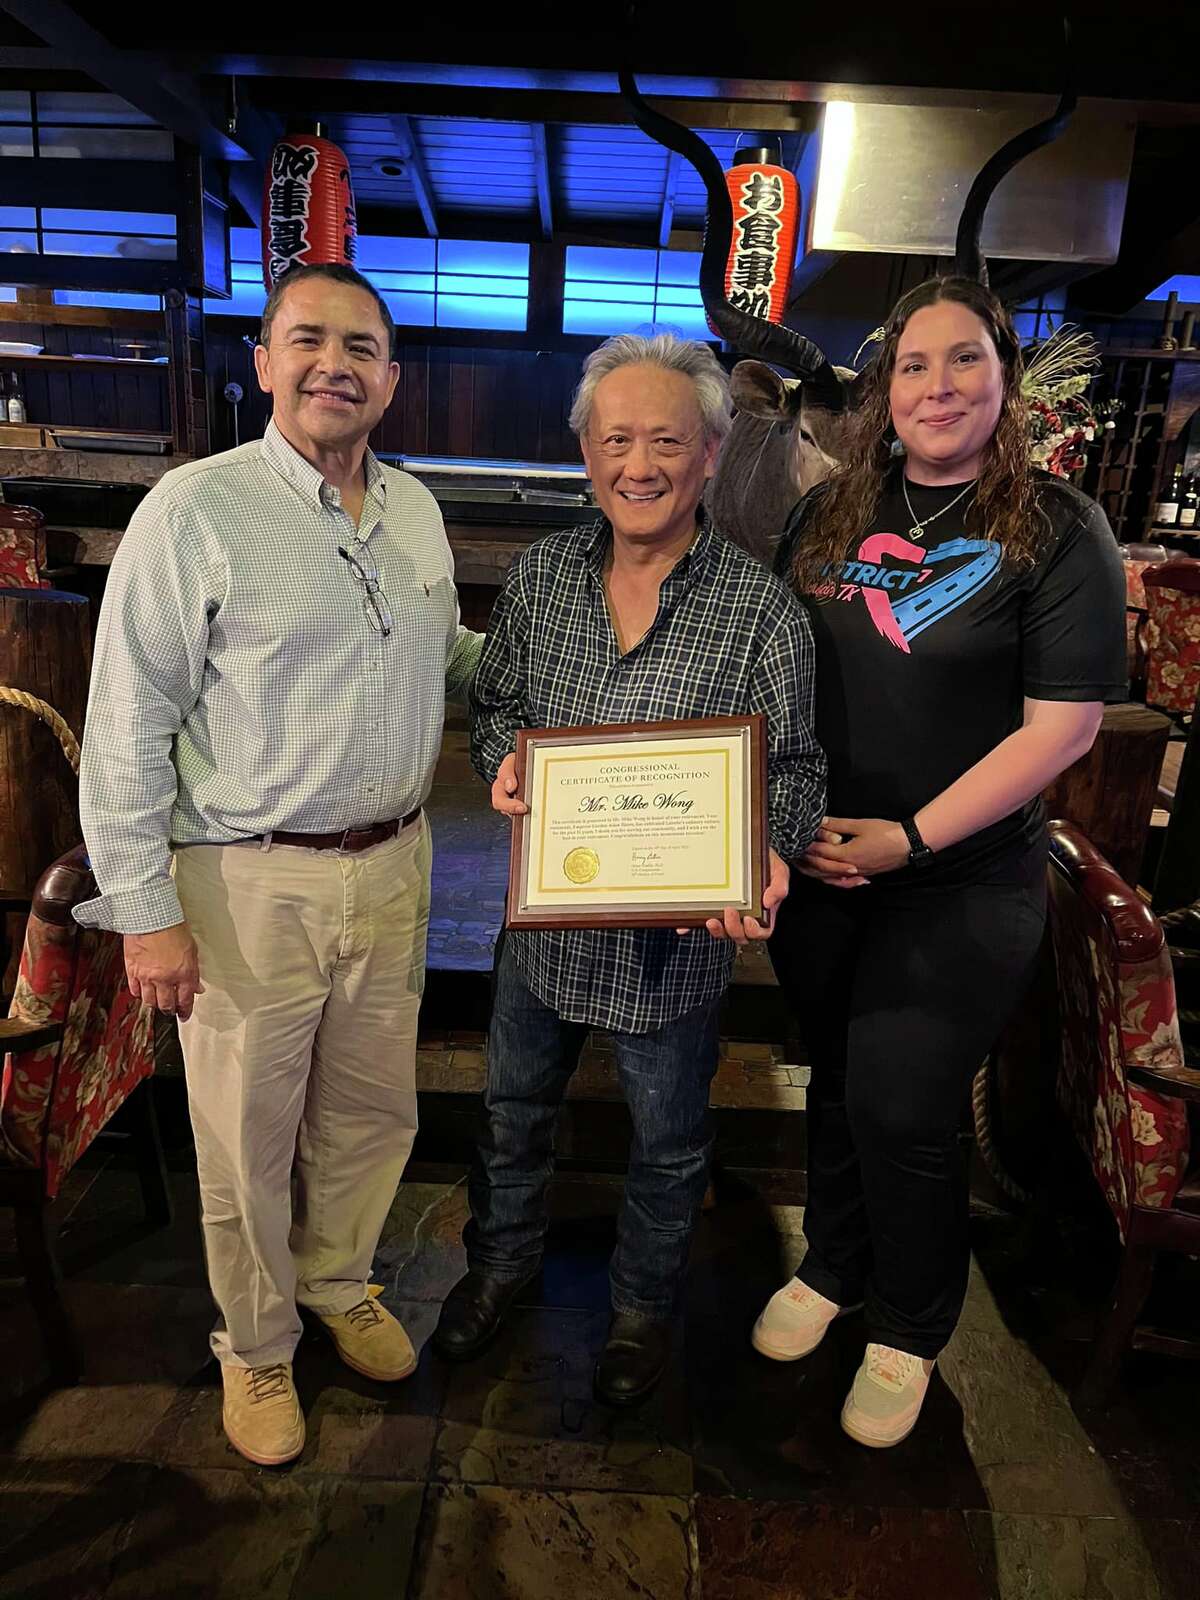 Emperor Garden Asian Bistro's owner Michael Wong, center, is pictured on the final day of his establishment being open as he retires after 31 years on April 10, 2022. He is pictured with a plaque next to Rep. Henry Cuellar and District VII Councilmember Vanessa Perez.